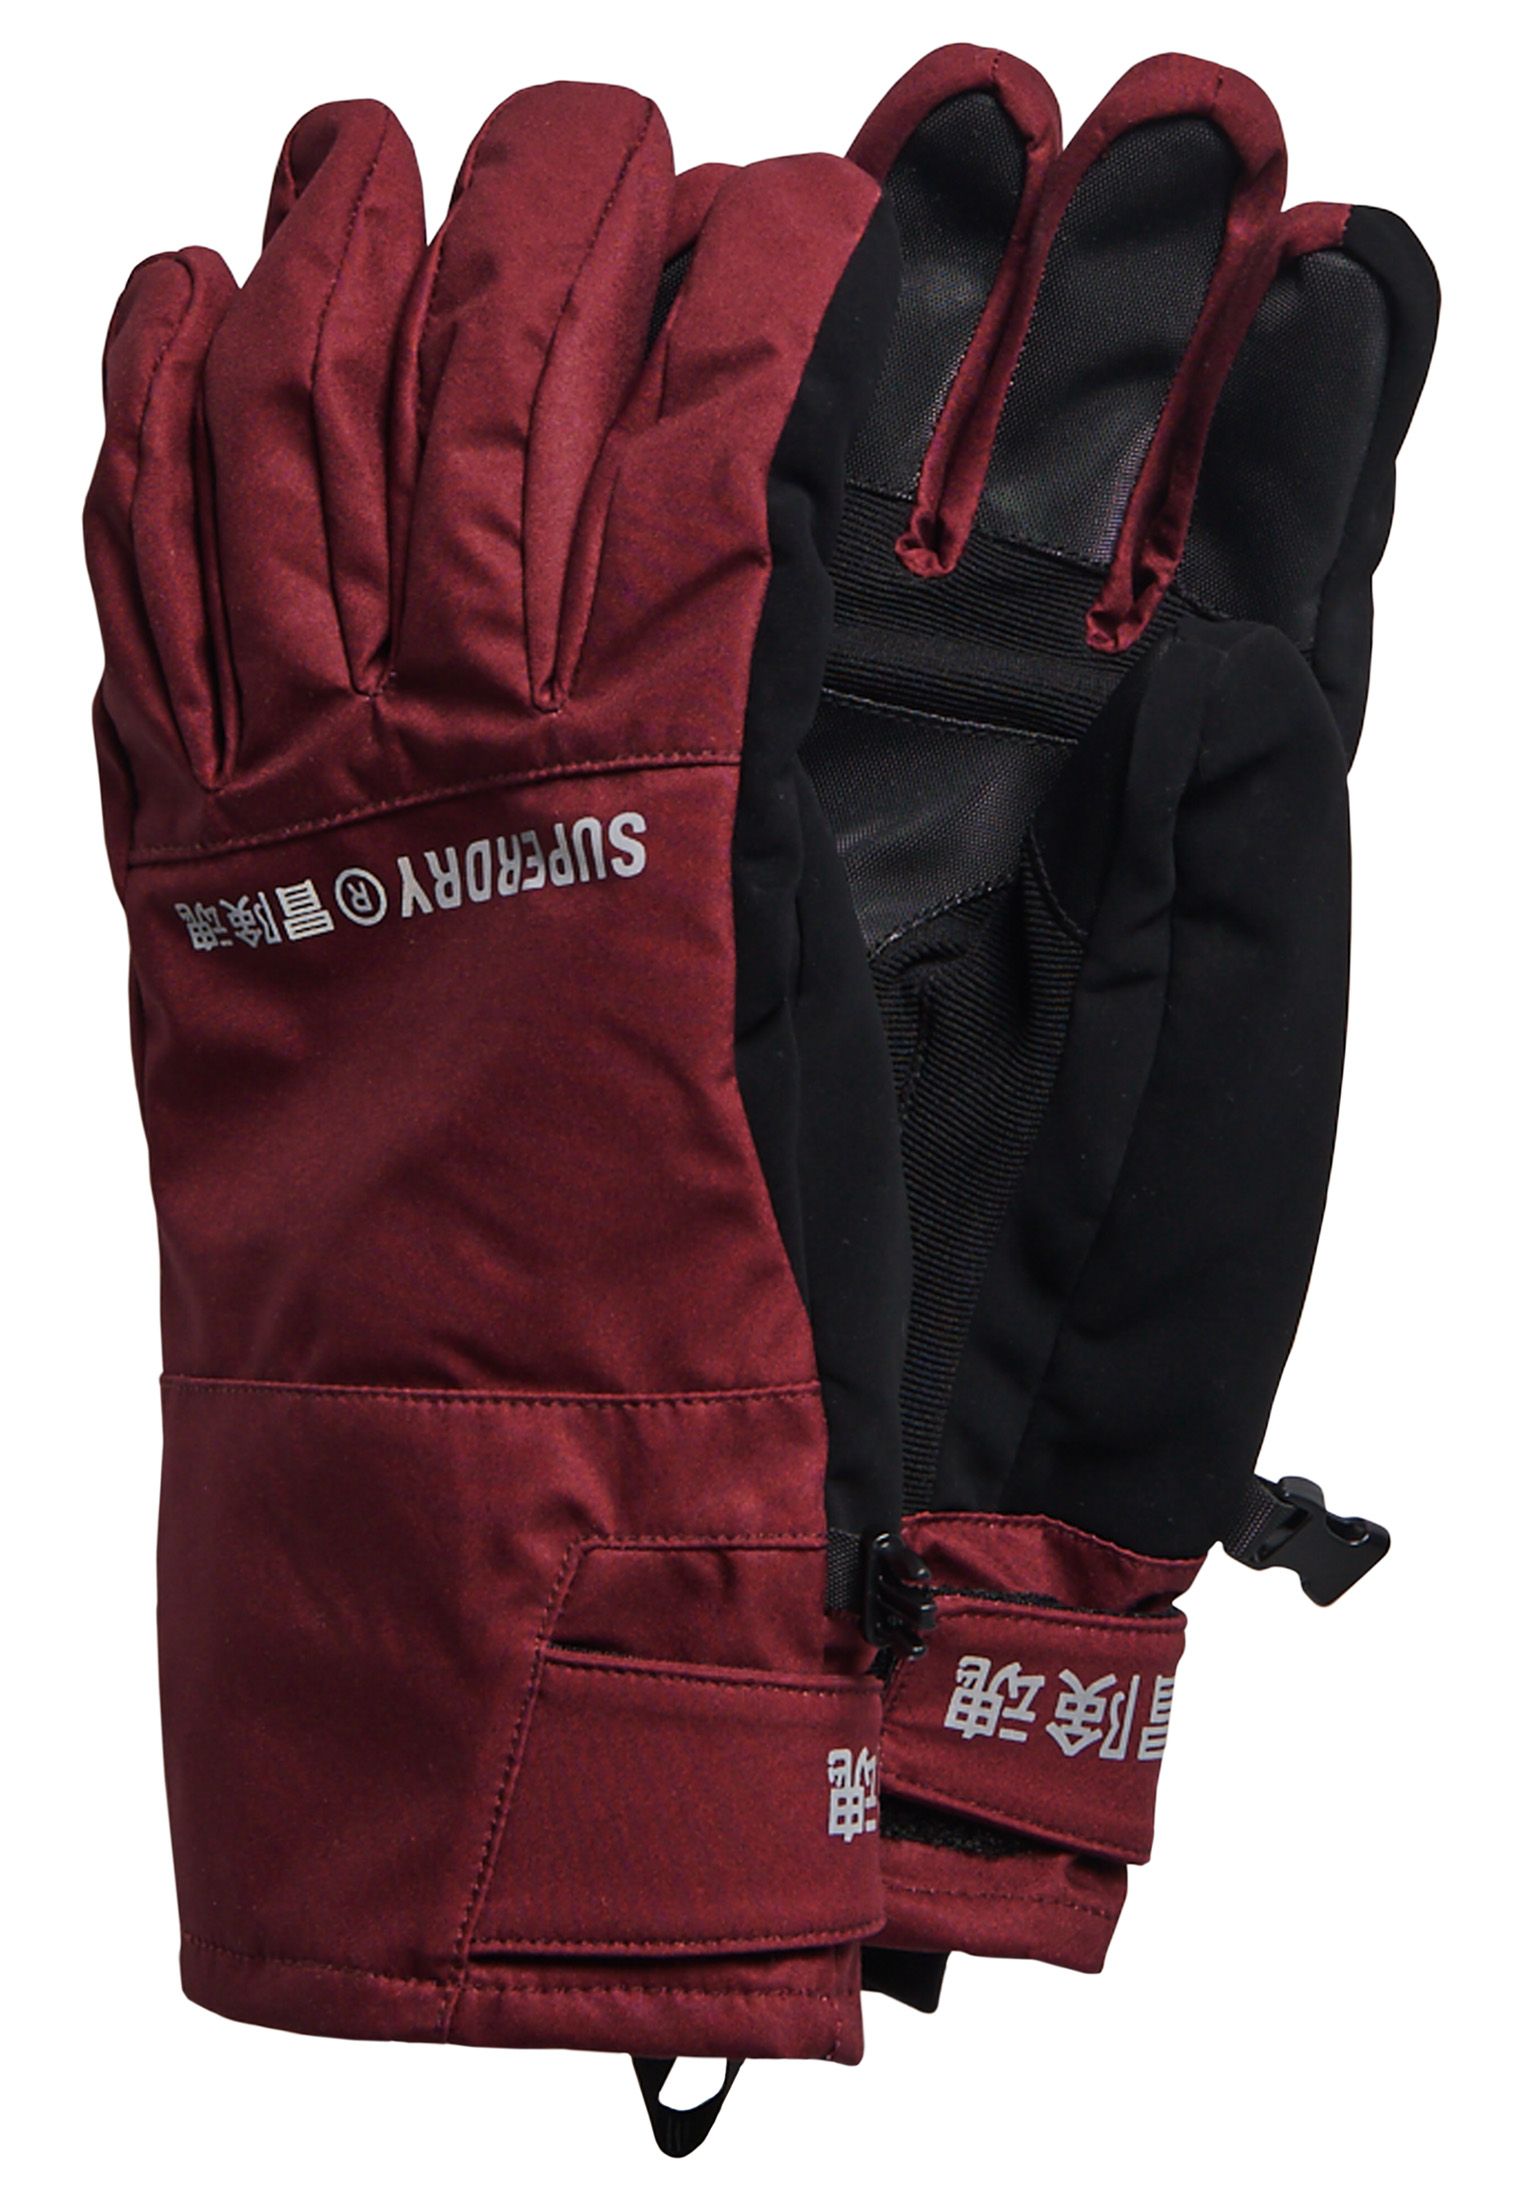 Essential for your ski trip, the Snow gloves are designed to keep you safe with reflective detailing enabling you to be visible at all times. Also, features is hook and loop adjuster cuffs designed to keep the snow out and your hands warm and toasty this season.Breathable 20k/MM - PRovides airflow comfort for very high-level activityWaterproof 20k/MM - Waterproof under high pressure, for heavy rain and wet snowAnti scuff detailing to palm and fingertipsAdjustable hook and loop cuffsSoft, padded liningClip fasteningReflective detailingPrinted Superdry logoSignature Japanese character